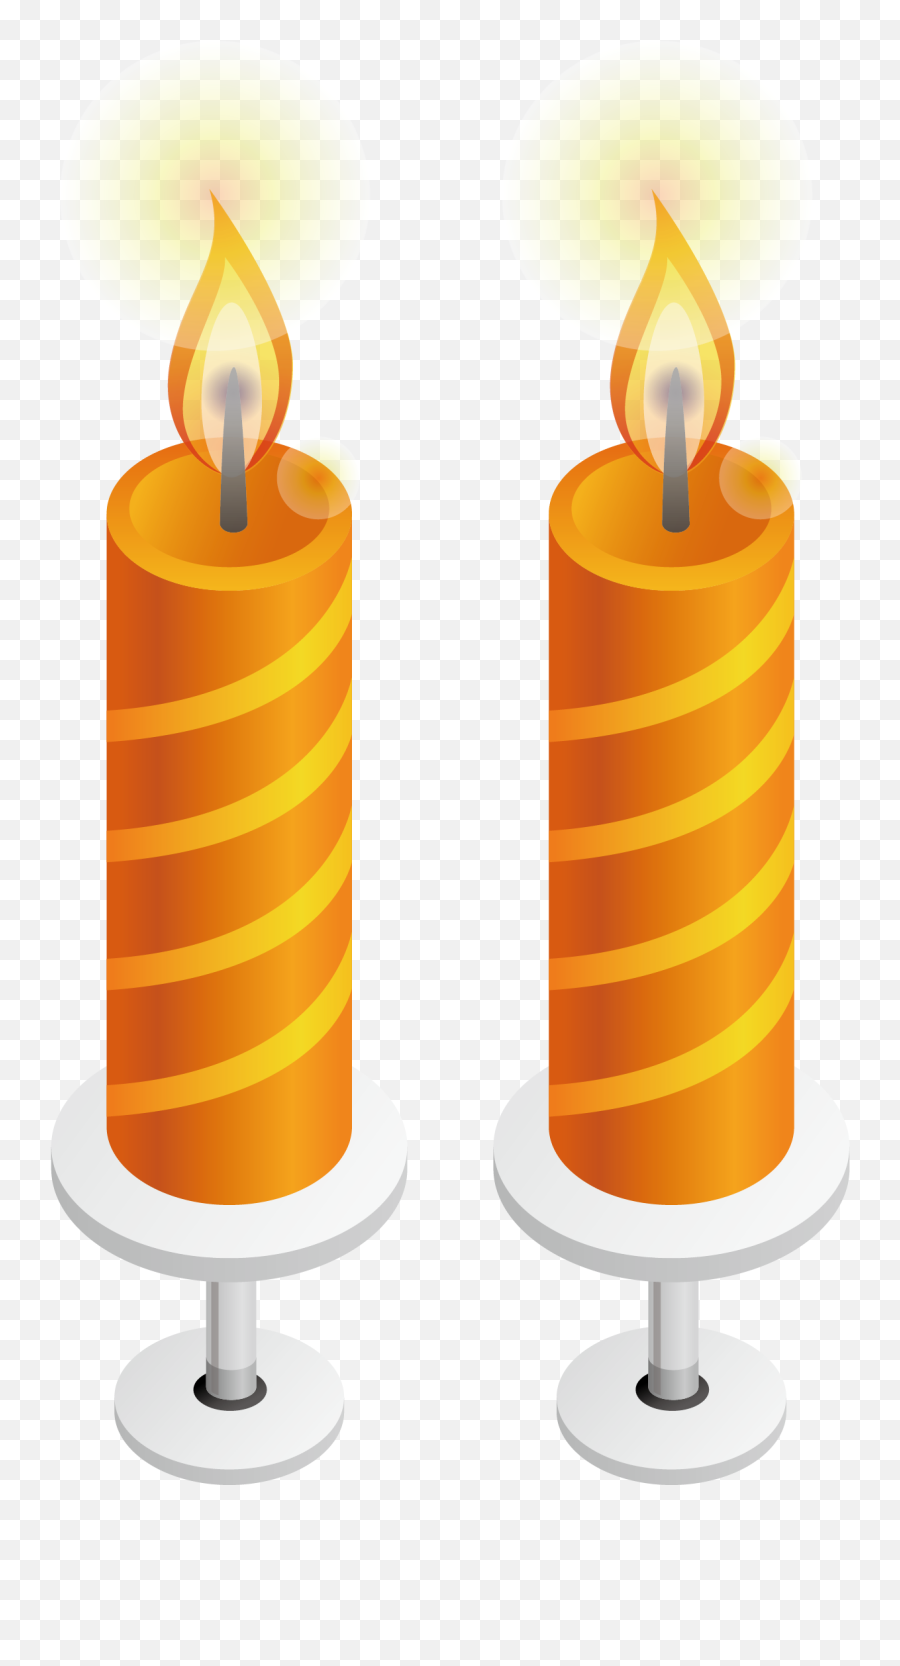 Candle Flame - Candle Png Vector Element Png Download 1207 Emoji,Candle Emoji Png